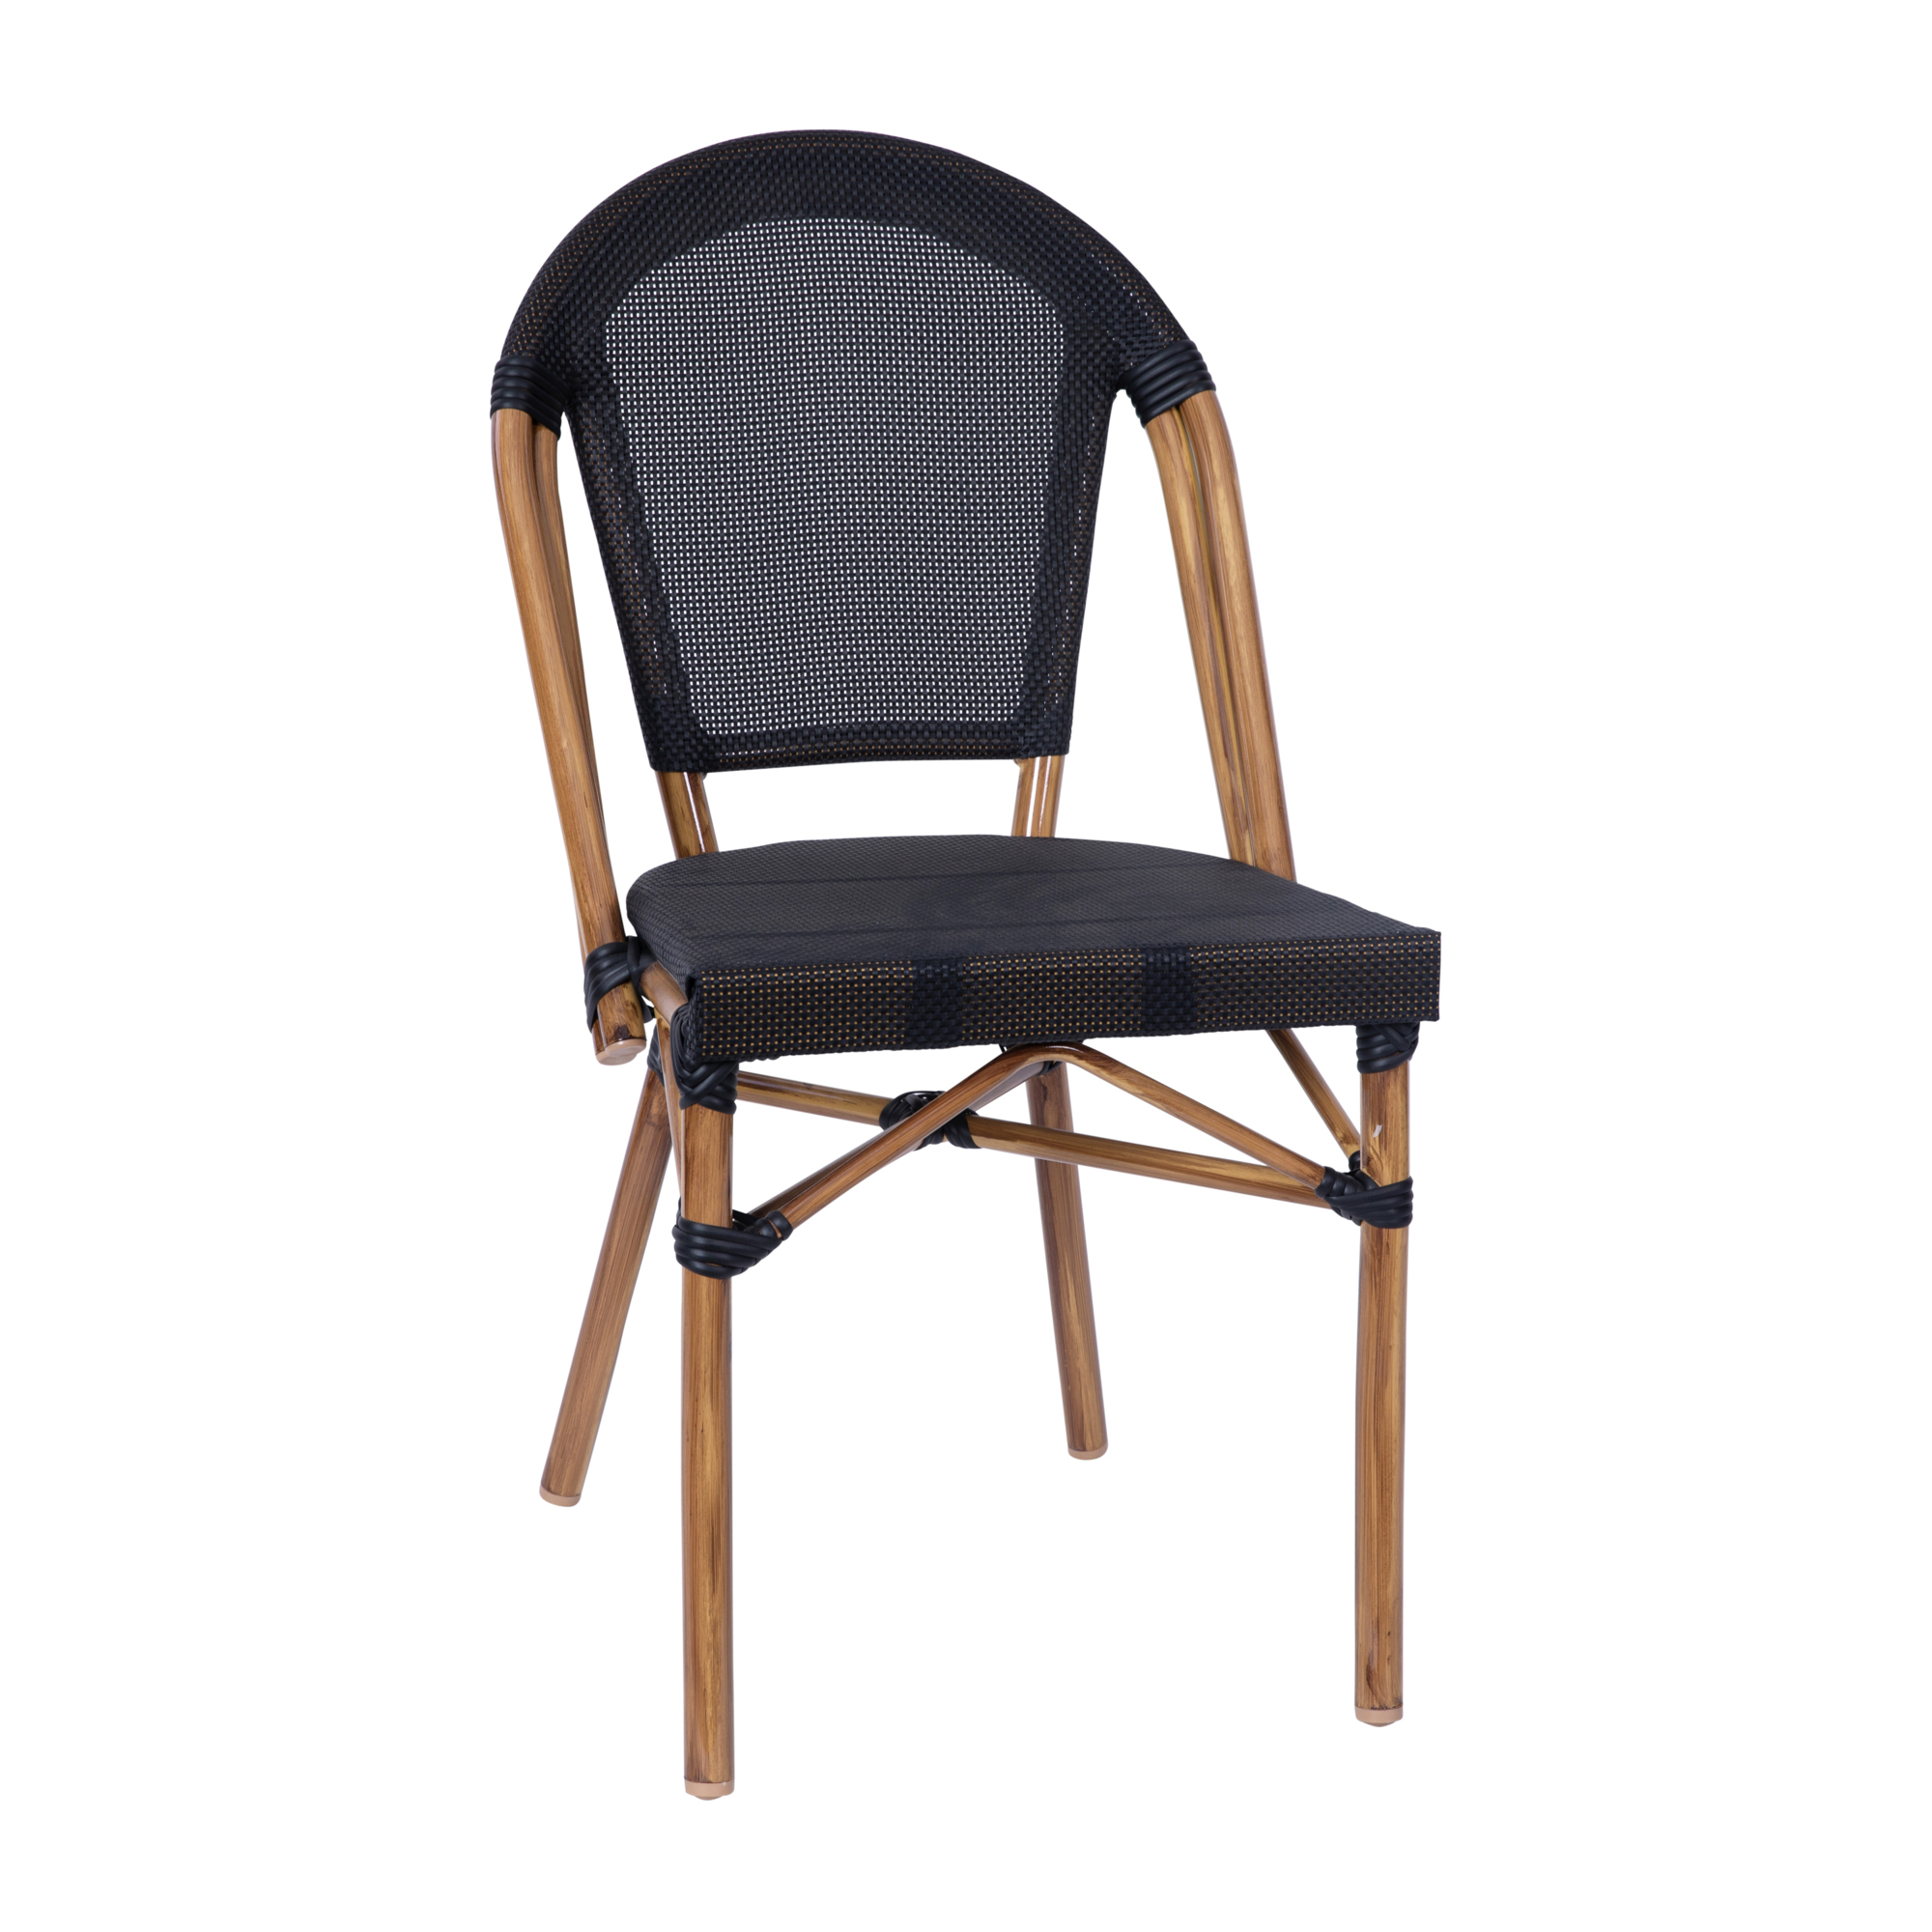 Flash Furniture, Black French Bistro Stacking Chair, Primary Color Black, Included (qty.) 1, Model SDA642107BKNAT